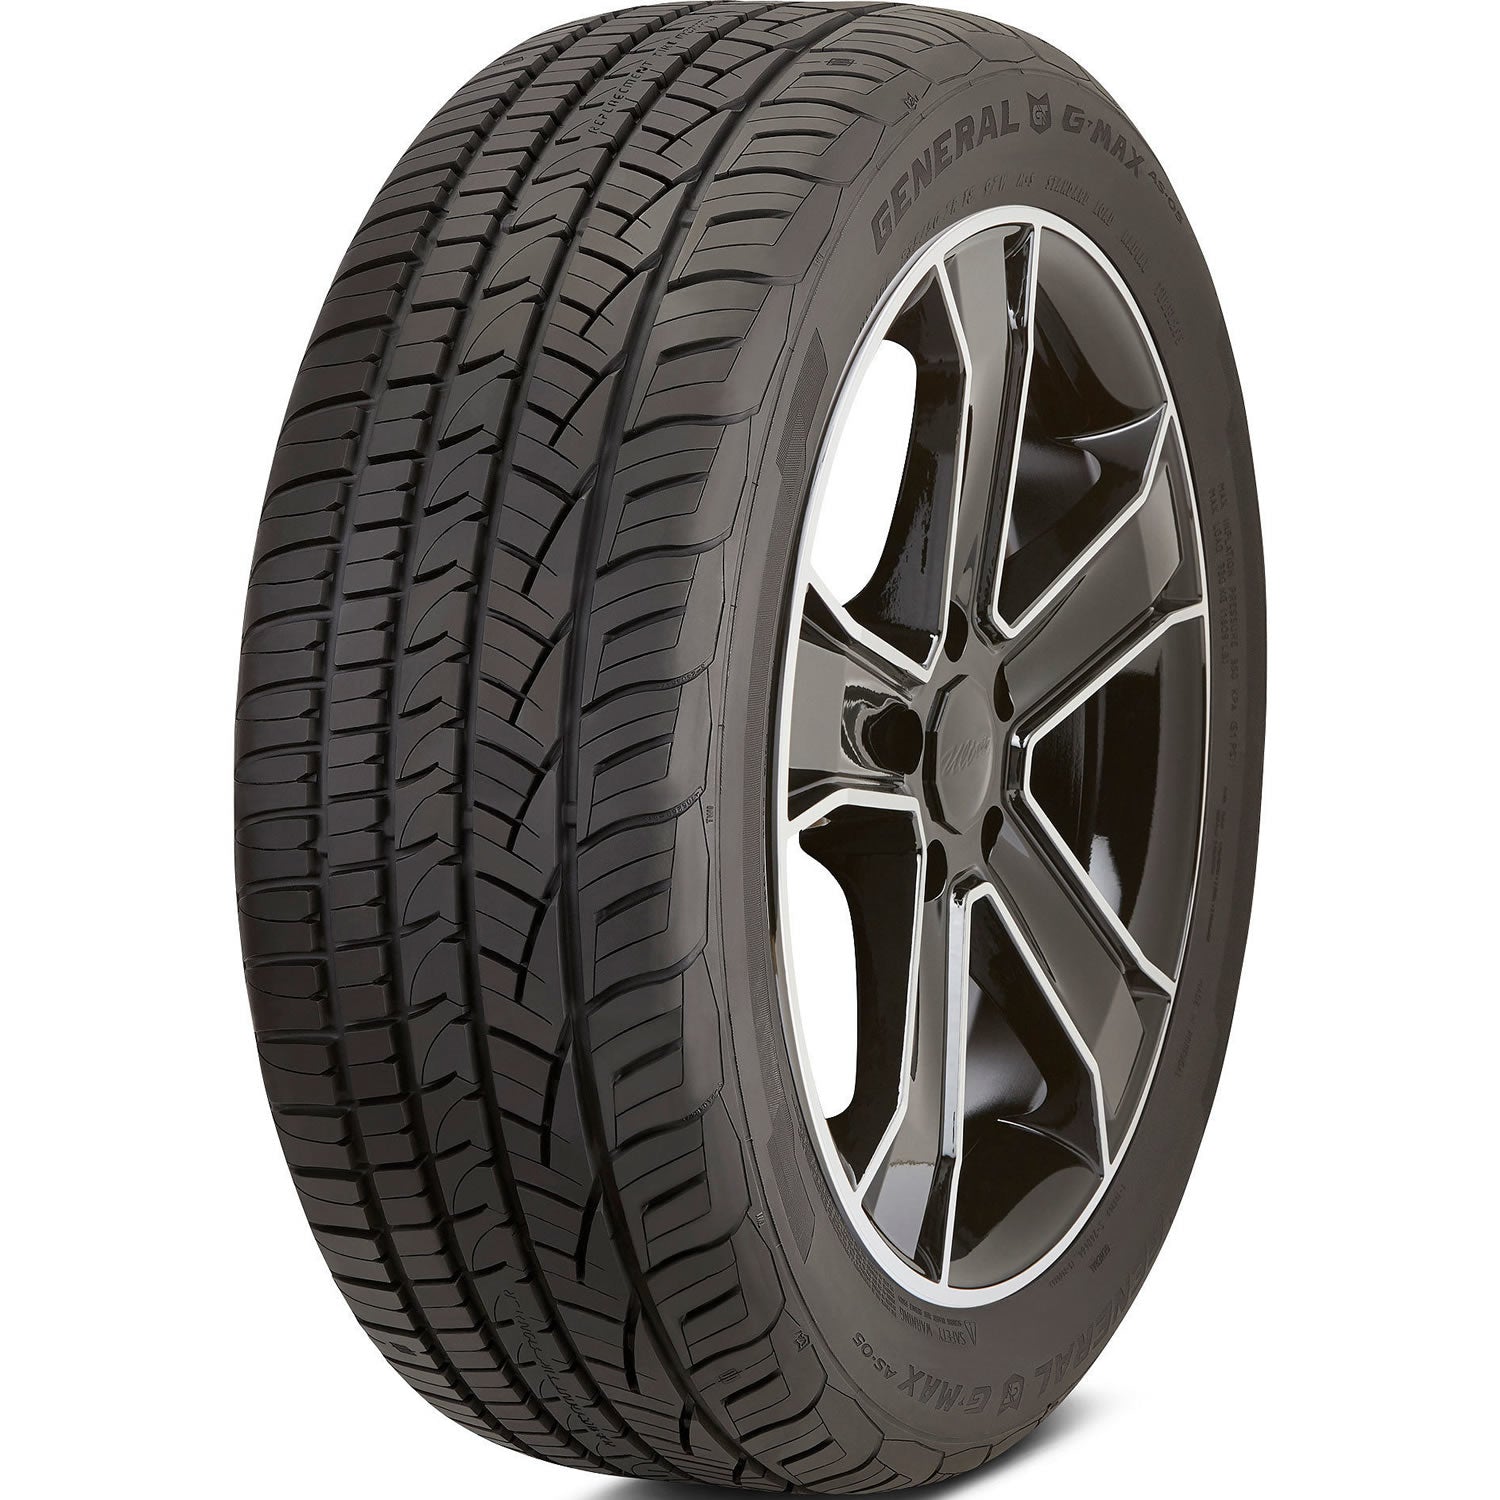 GENERAL G-MAX AS-05 205/55ZR16 (24.9X8.1R 16) Tires